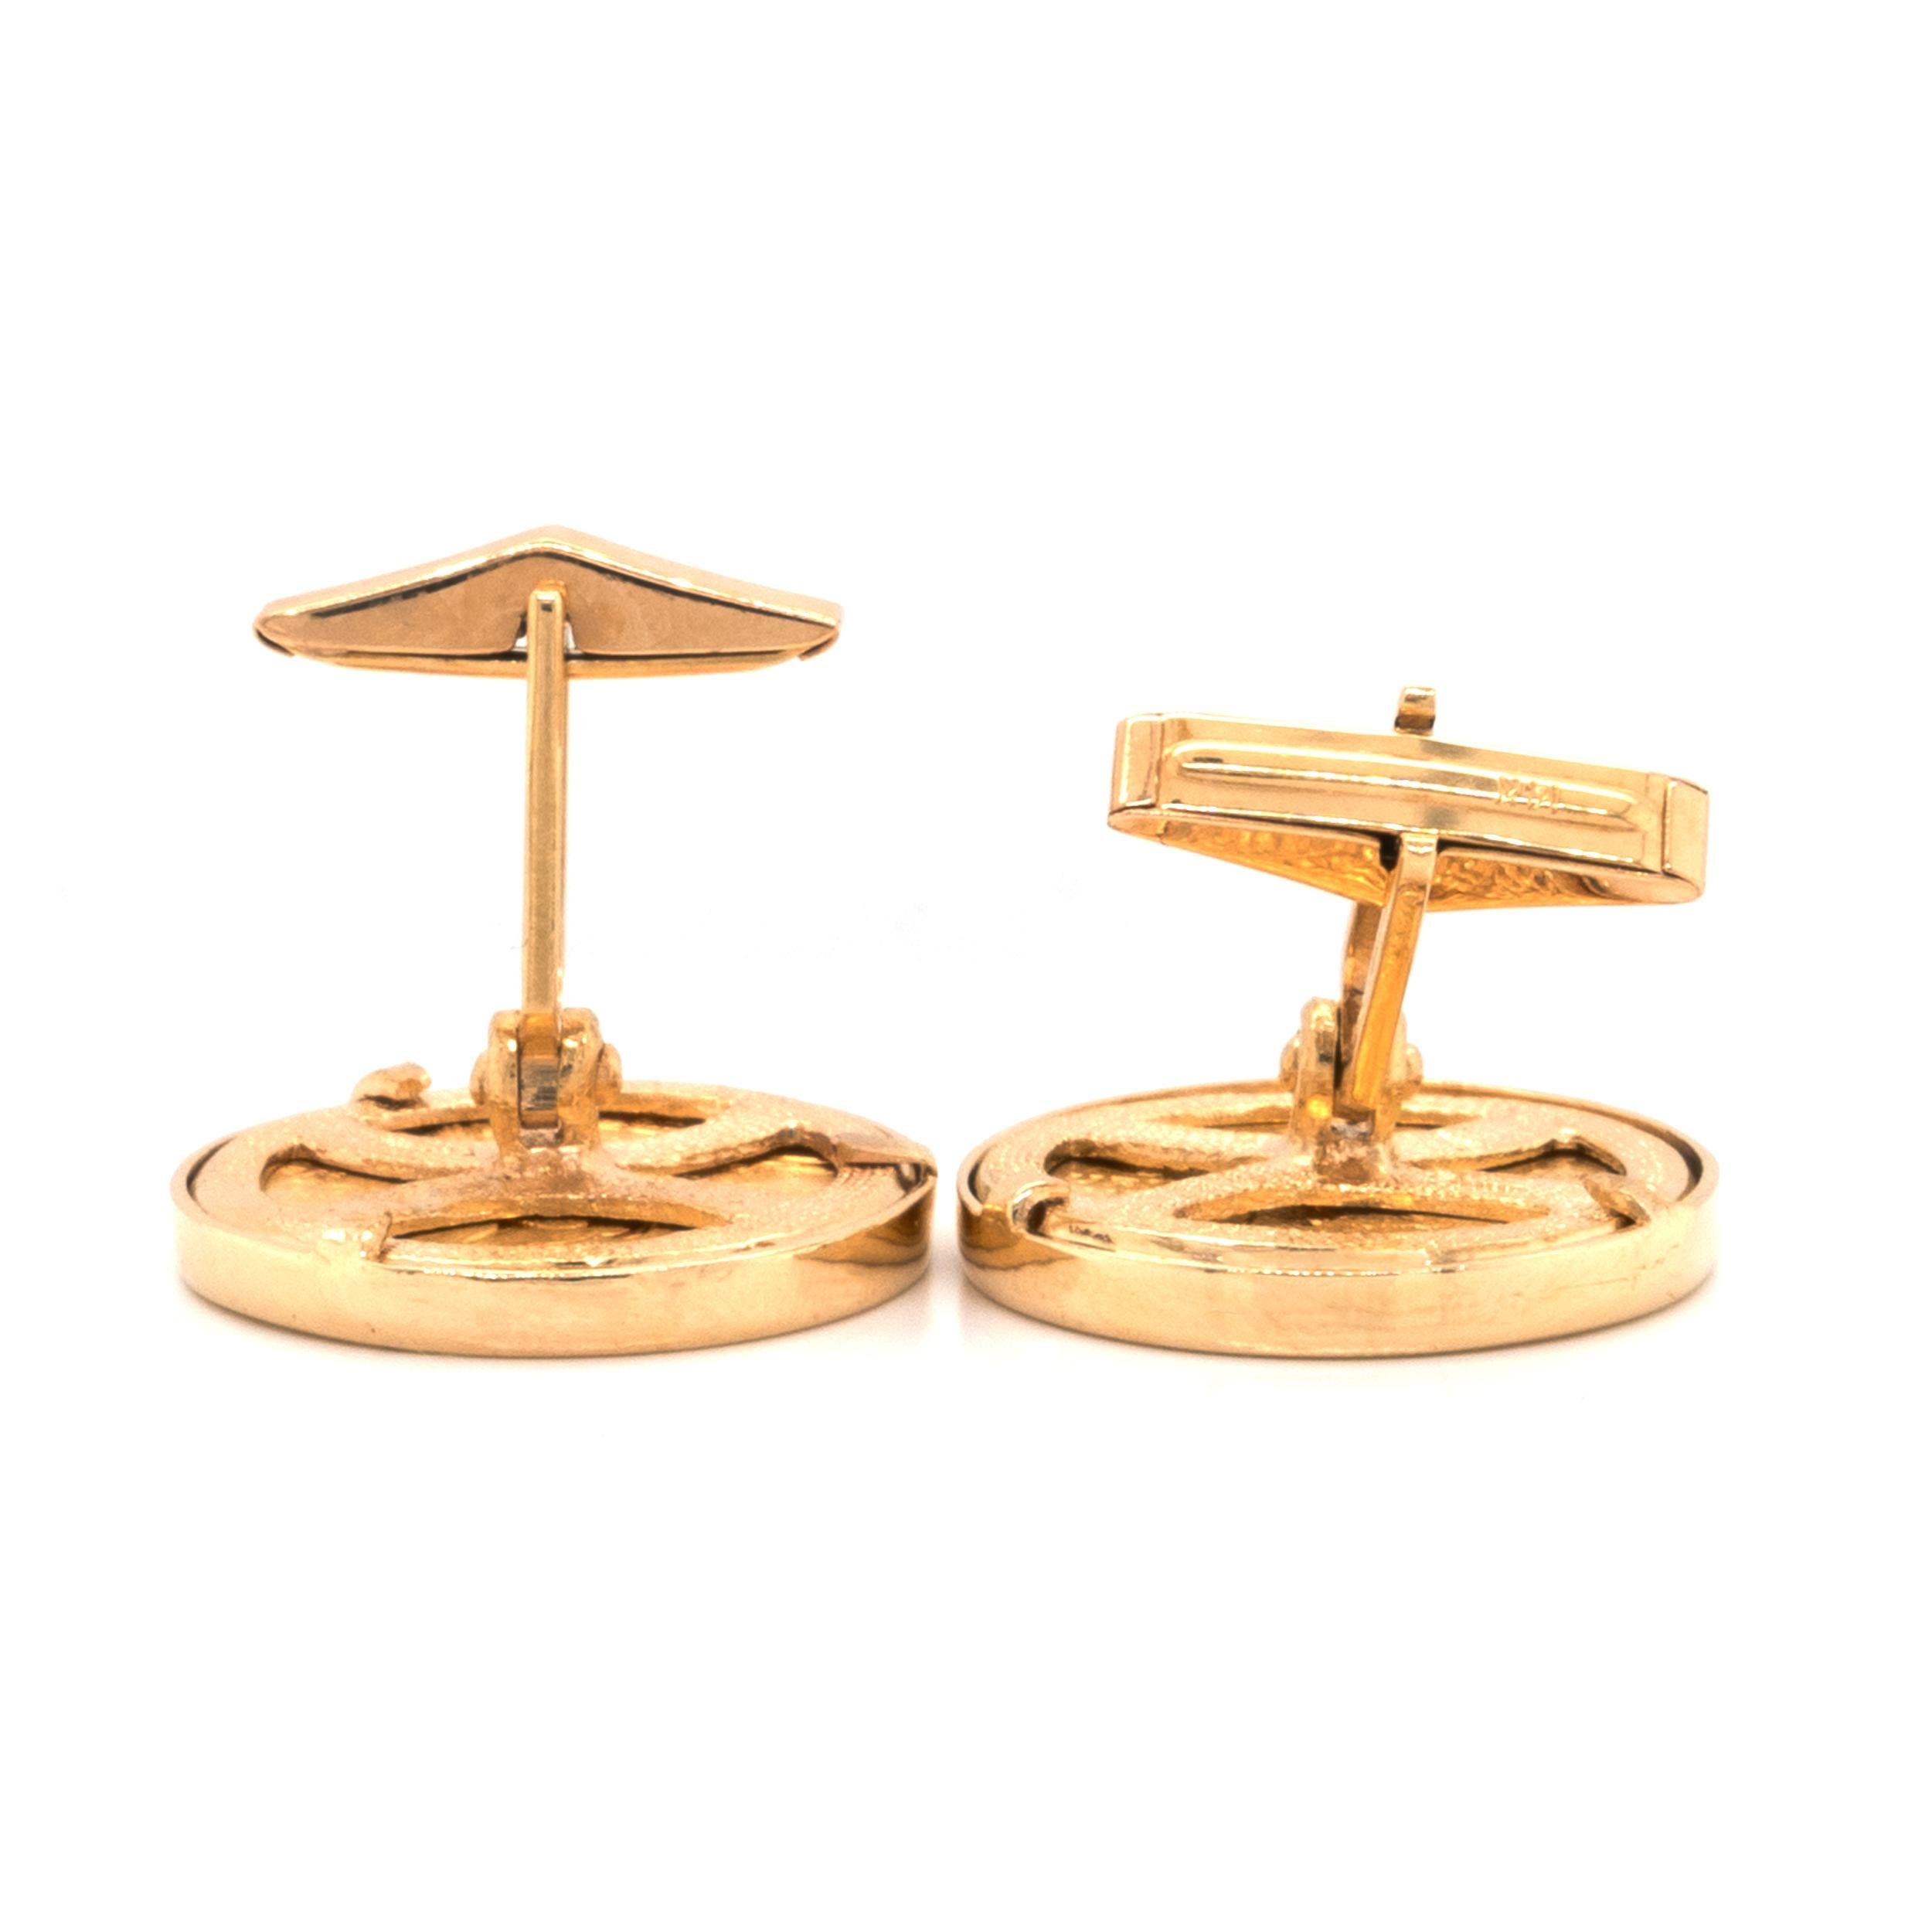 Material: .900 pure / 14K yellow gold
Dimensions: cufflinks measure 23mm 
Weight: 28.26 grams
